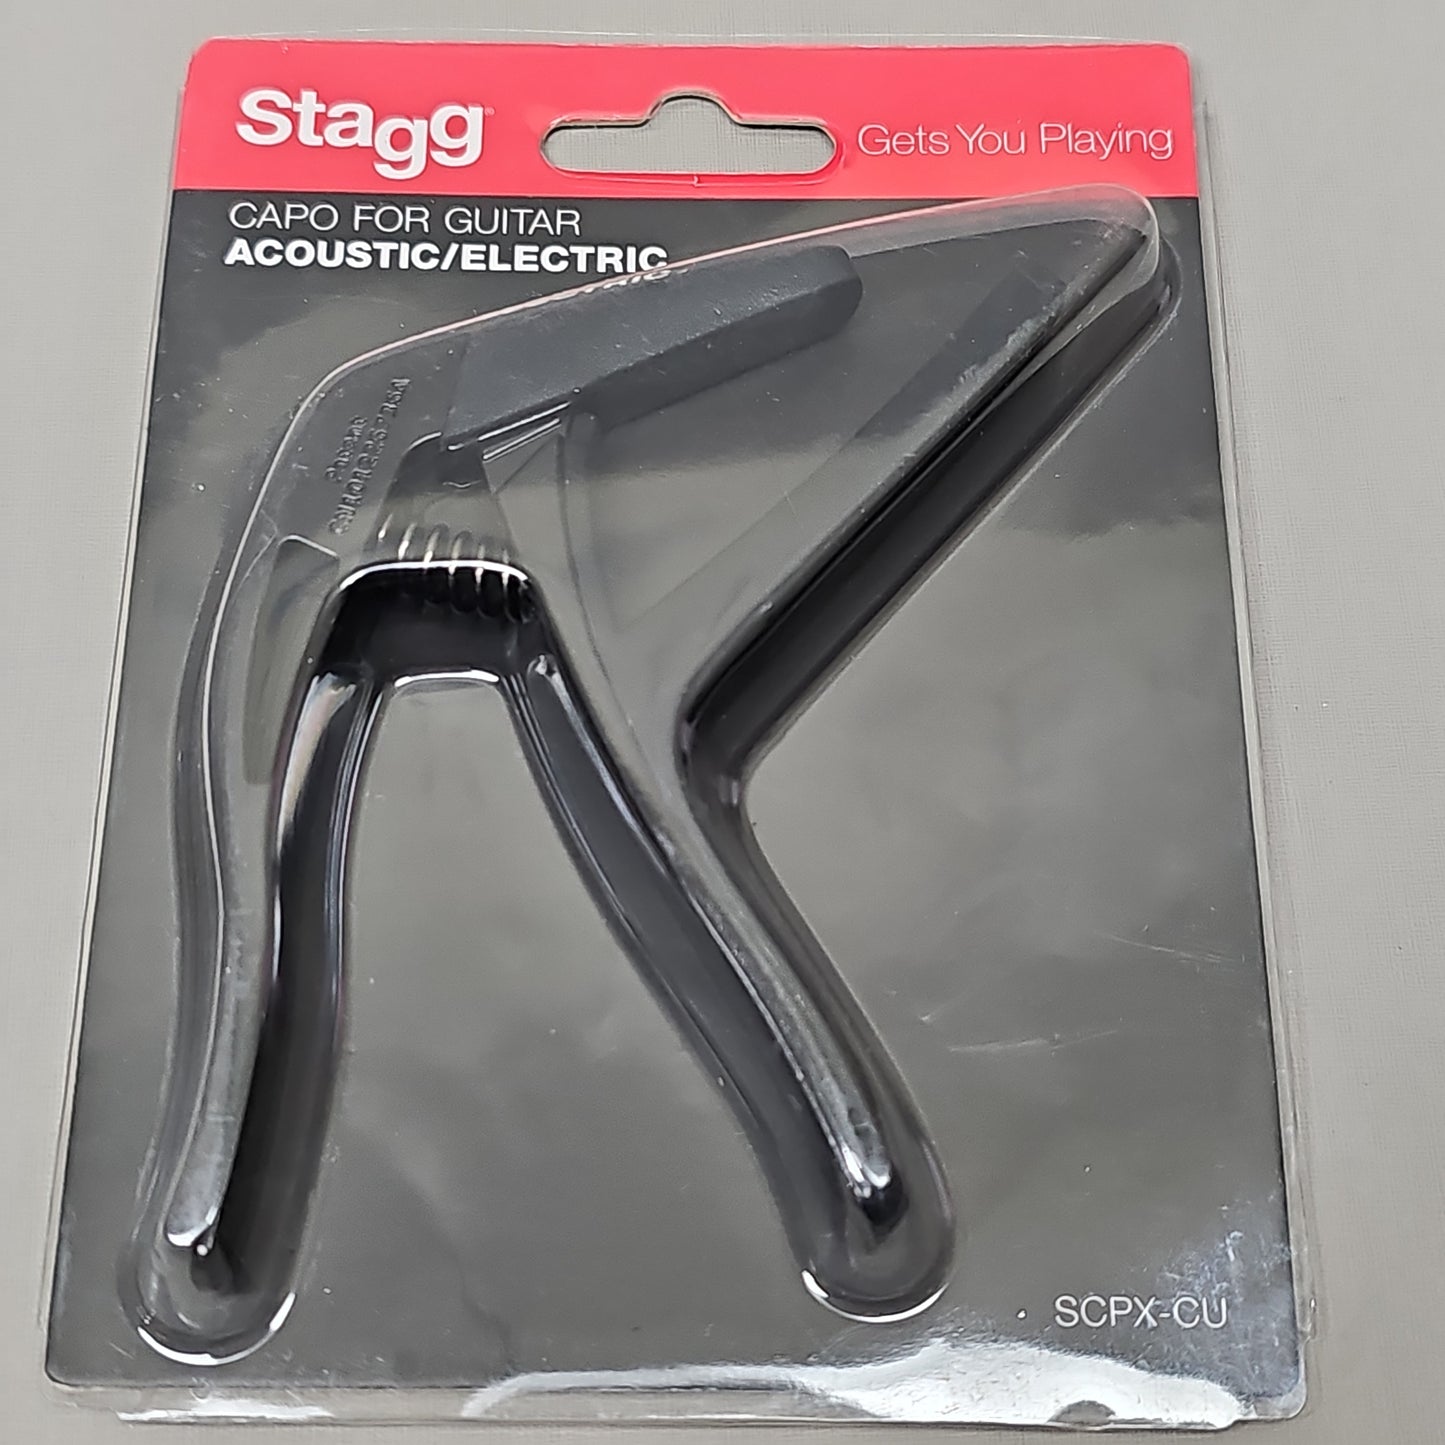 STAGG Guitar Capo Acoustic/Electric Black SCPX-CU BK (New)